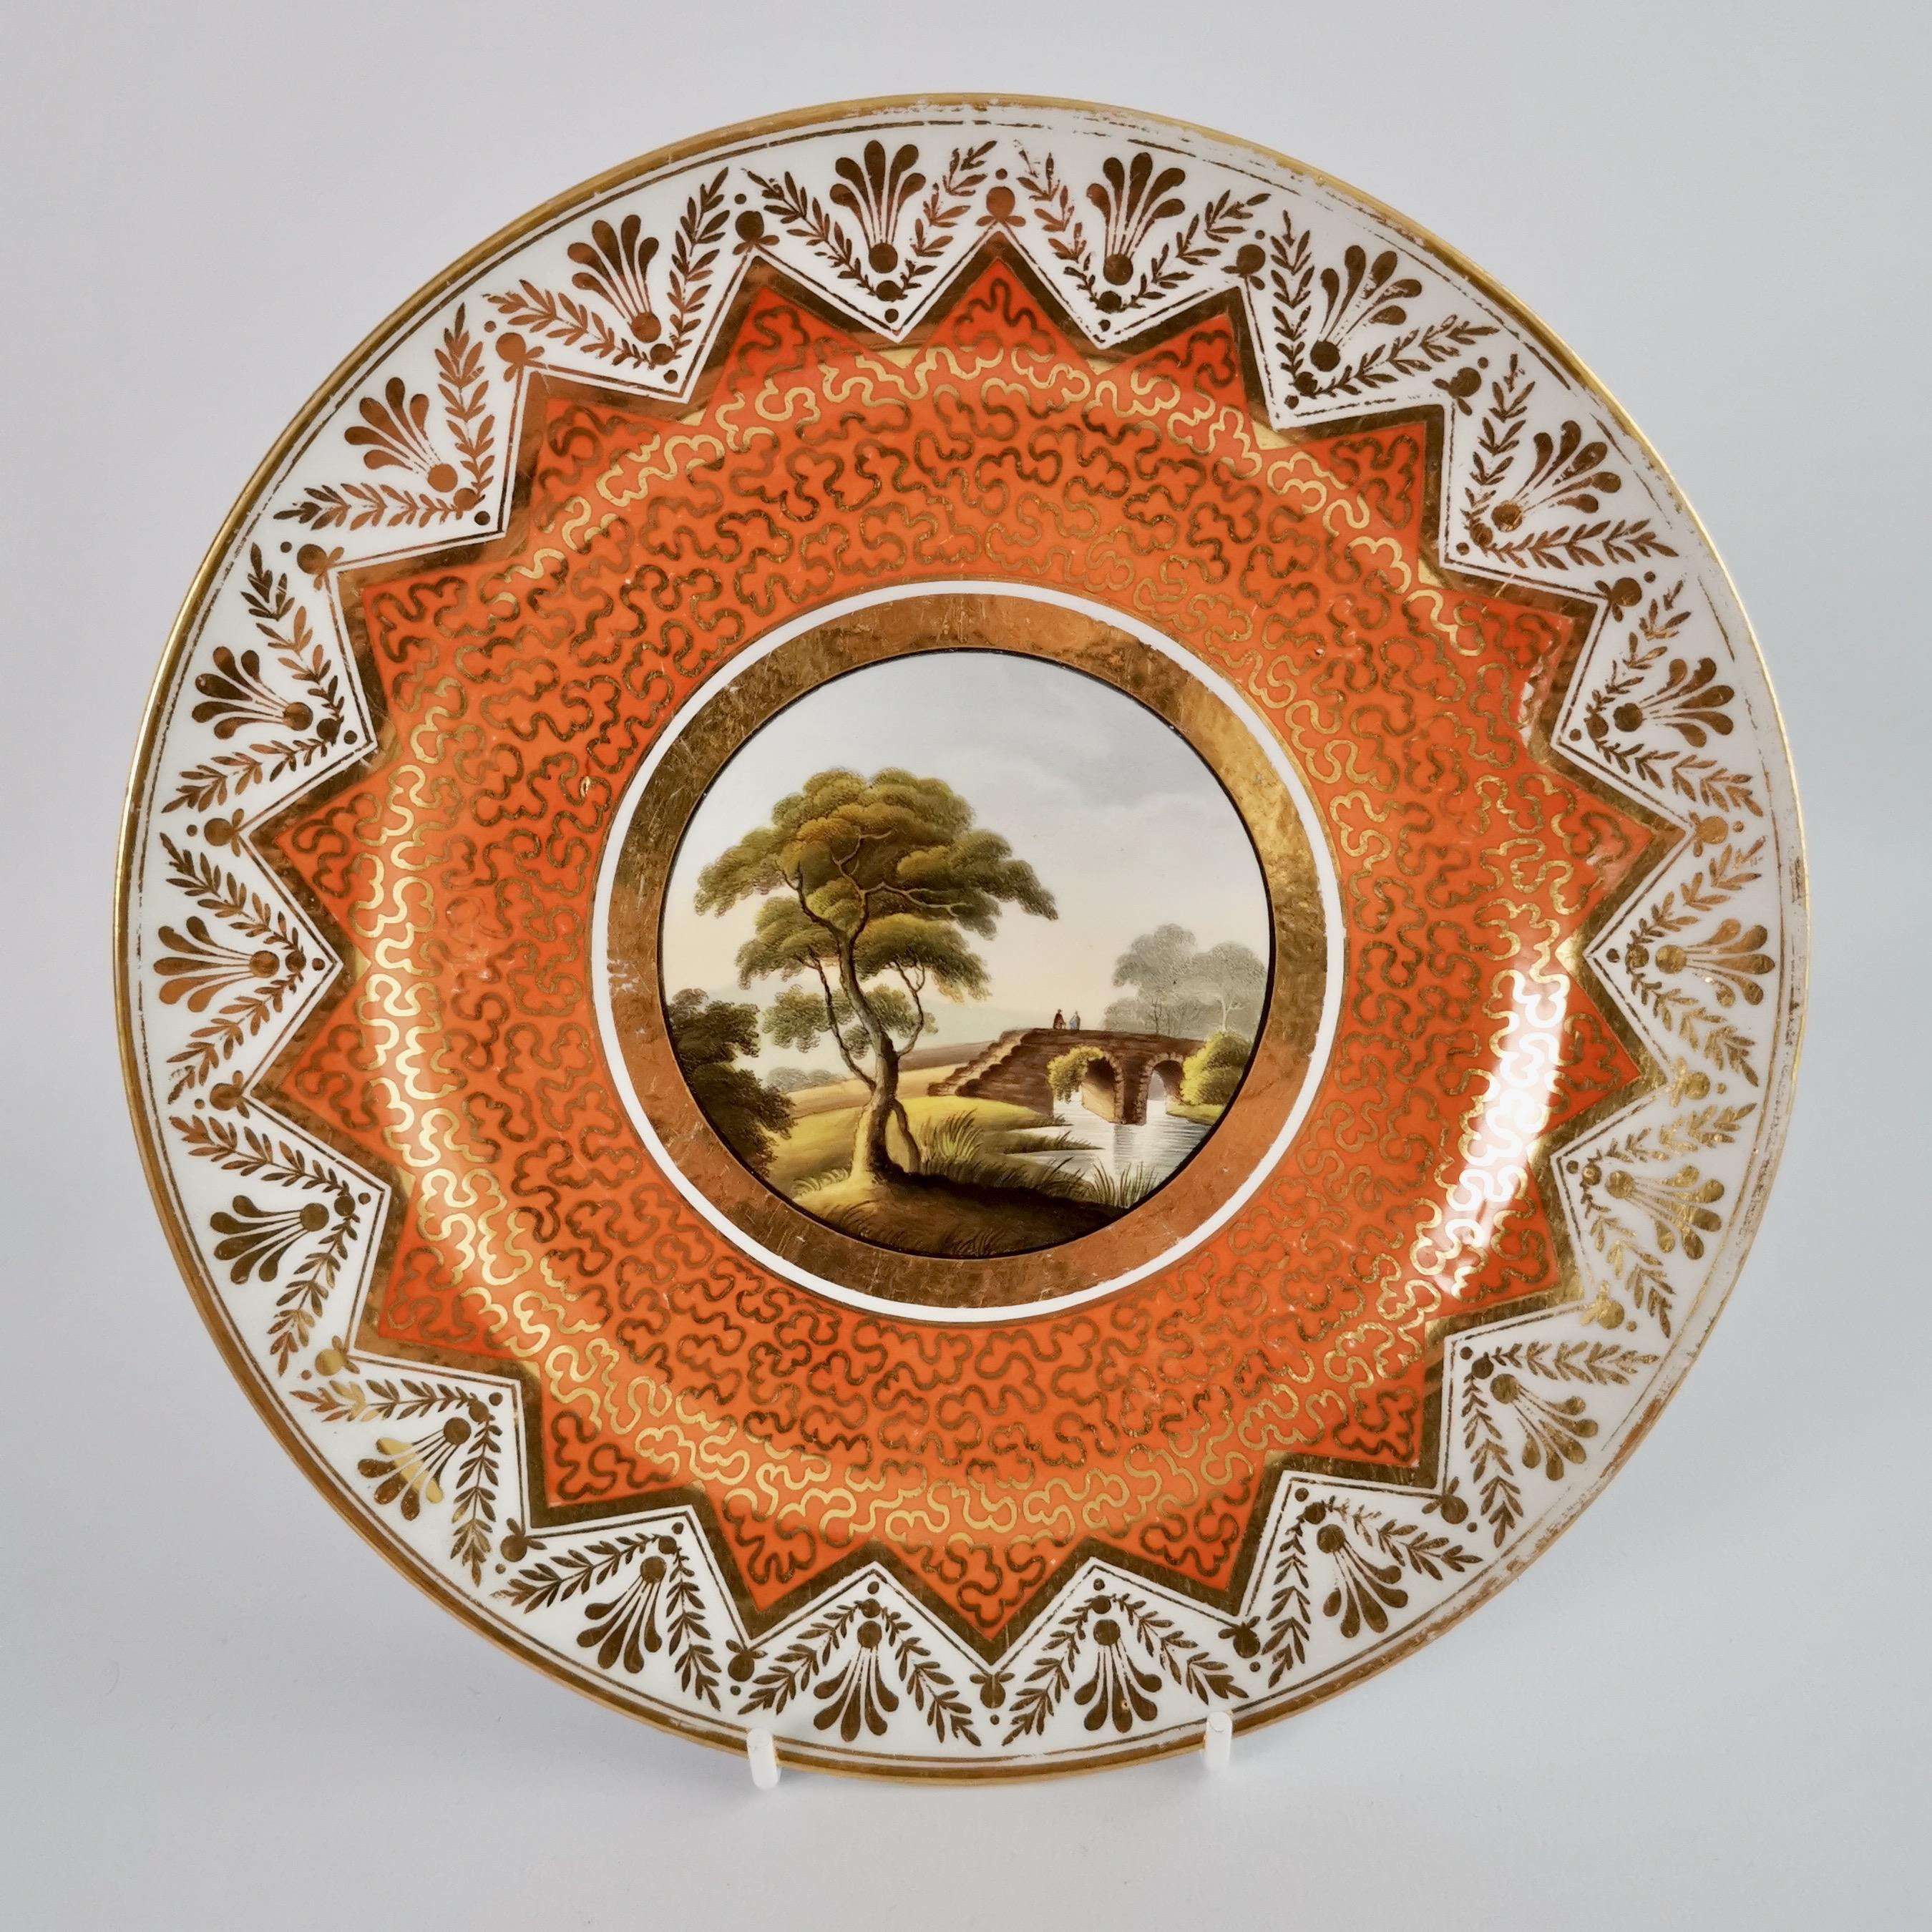 Porcelain Chamberlains Worcester Set of Plates, Orange, Paintings by H. Chamberlain, 1815